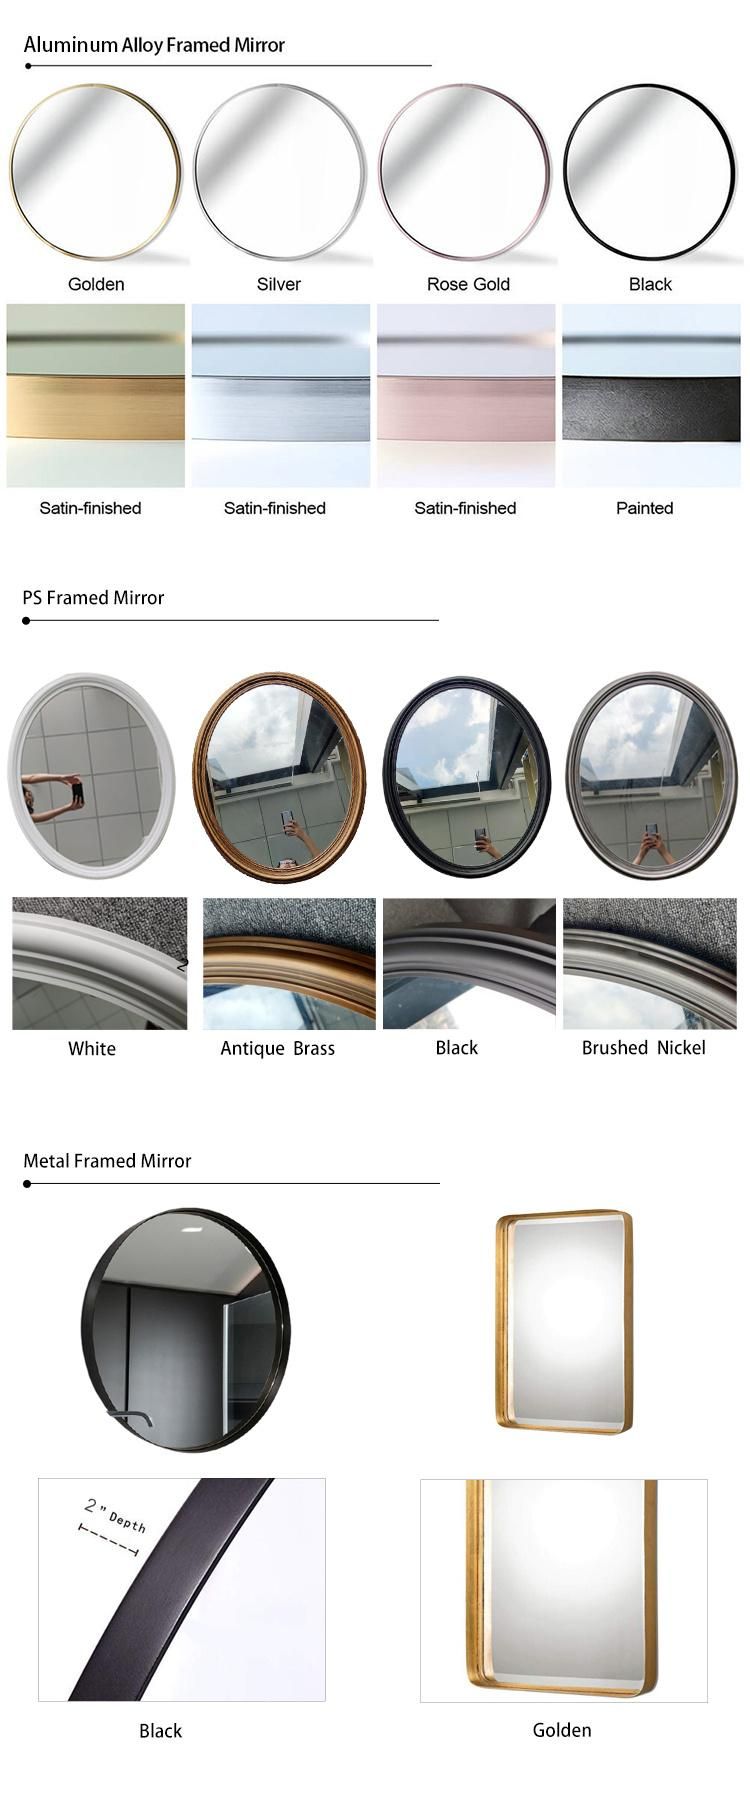 Modern Full Length Wall-Mounted Large Wall Mirror for Bedroom with Factory Price